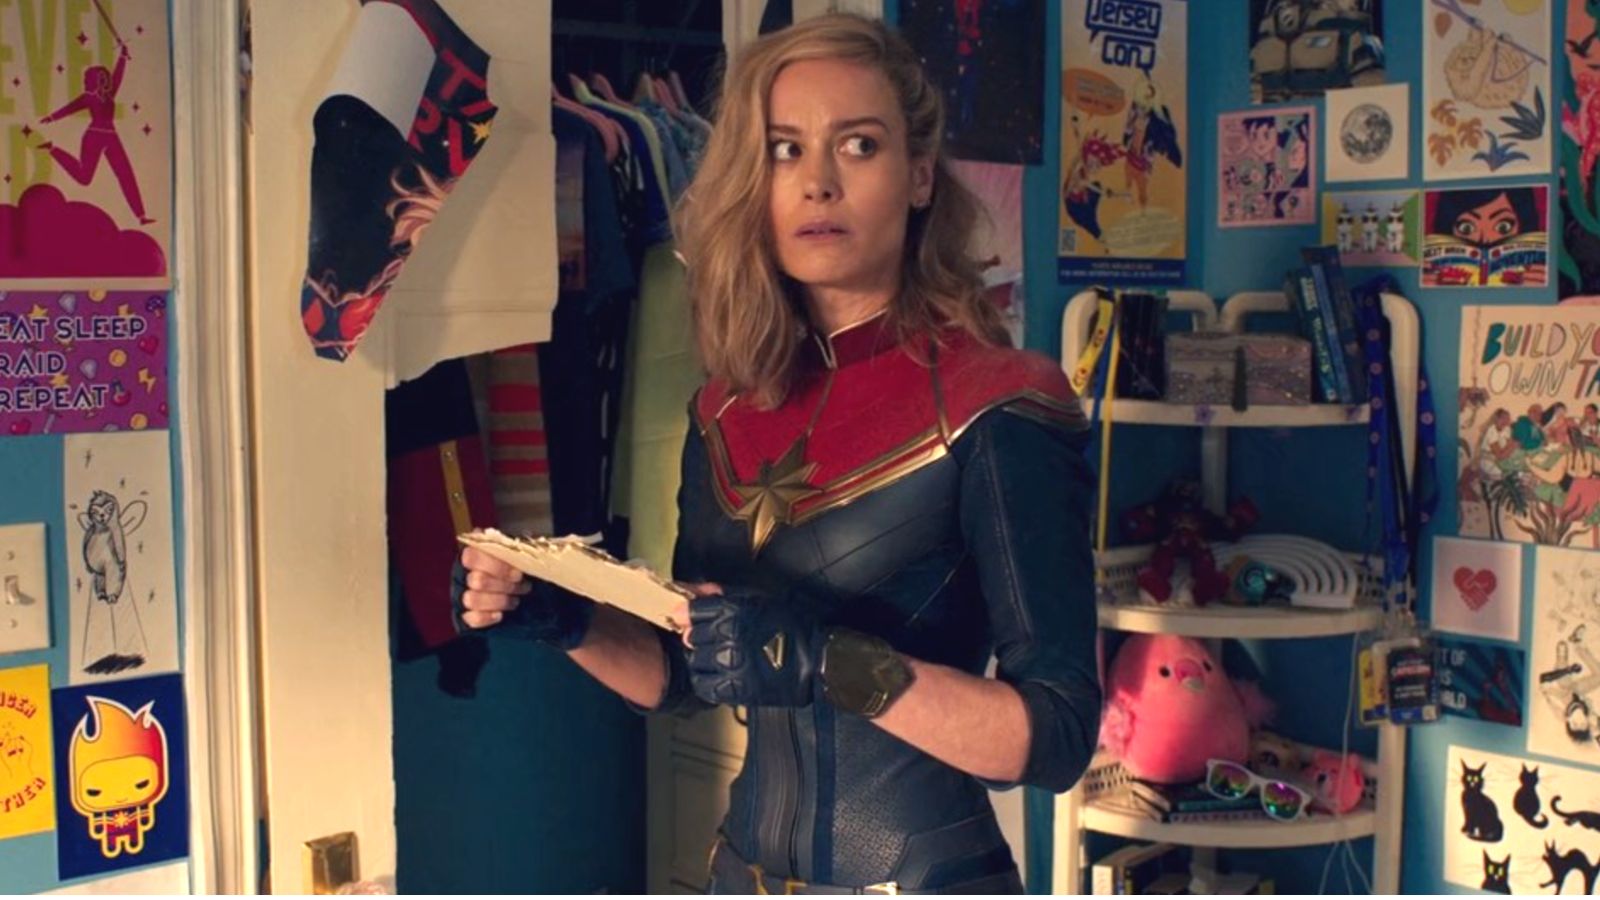 Brie Larson’s new superhero team could totally change the hierarchy of power in the MCU